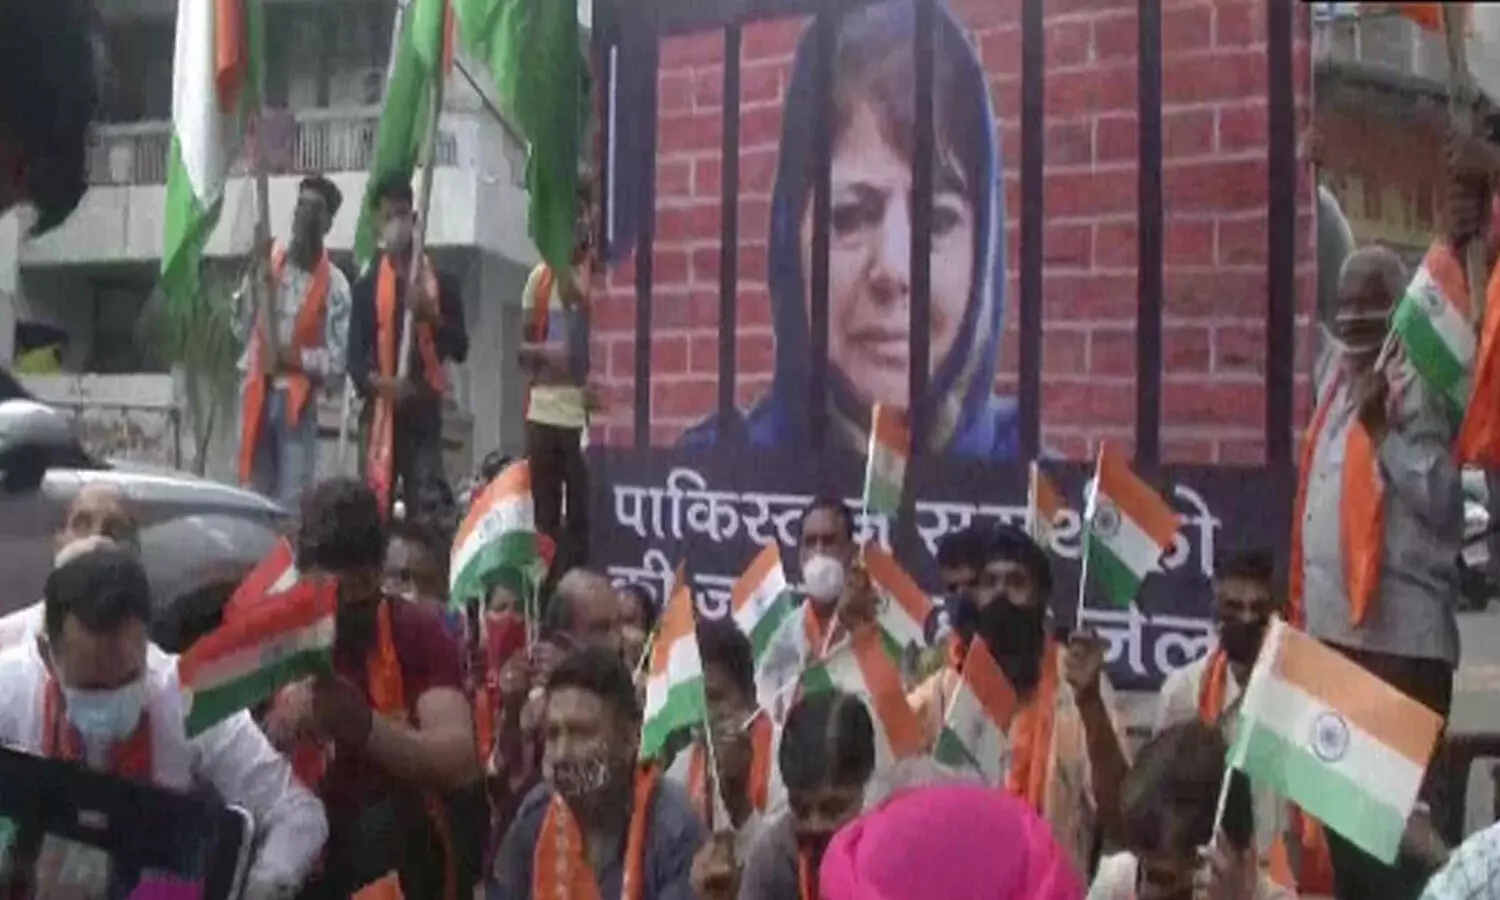 Jammu Kashmir: Dogra front protests against Mehbooba Mufti ahead of PM Modi meeting